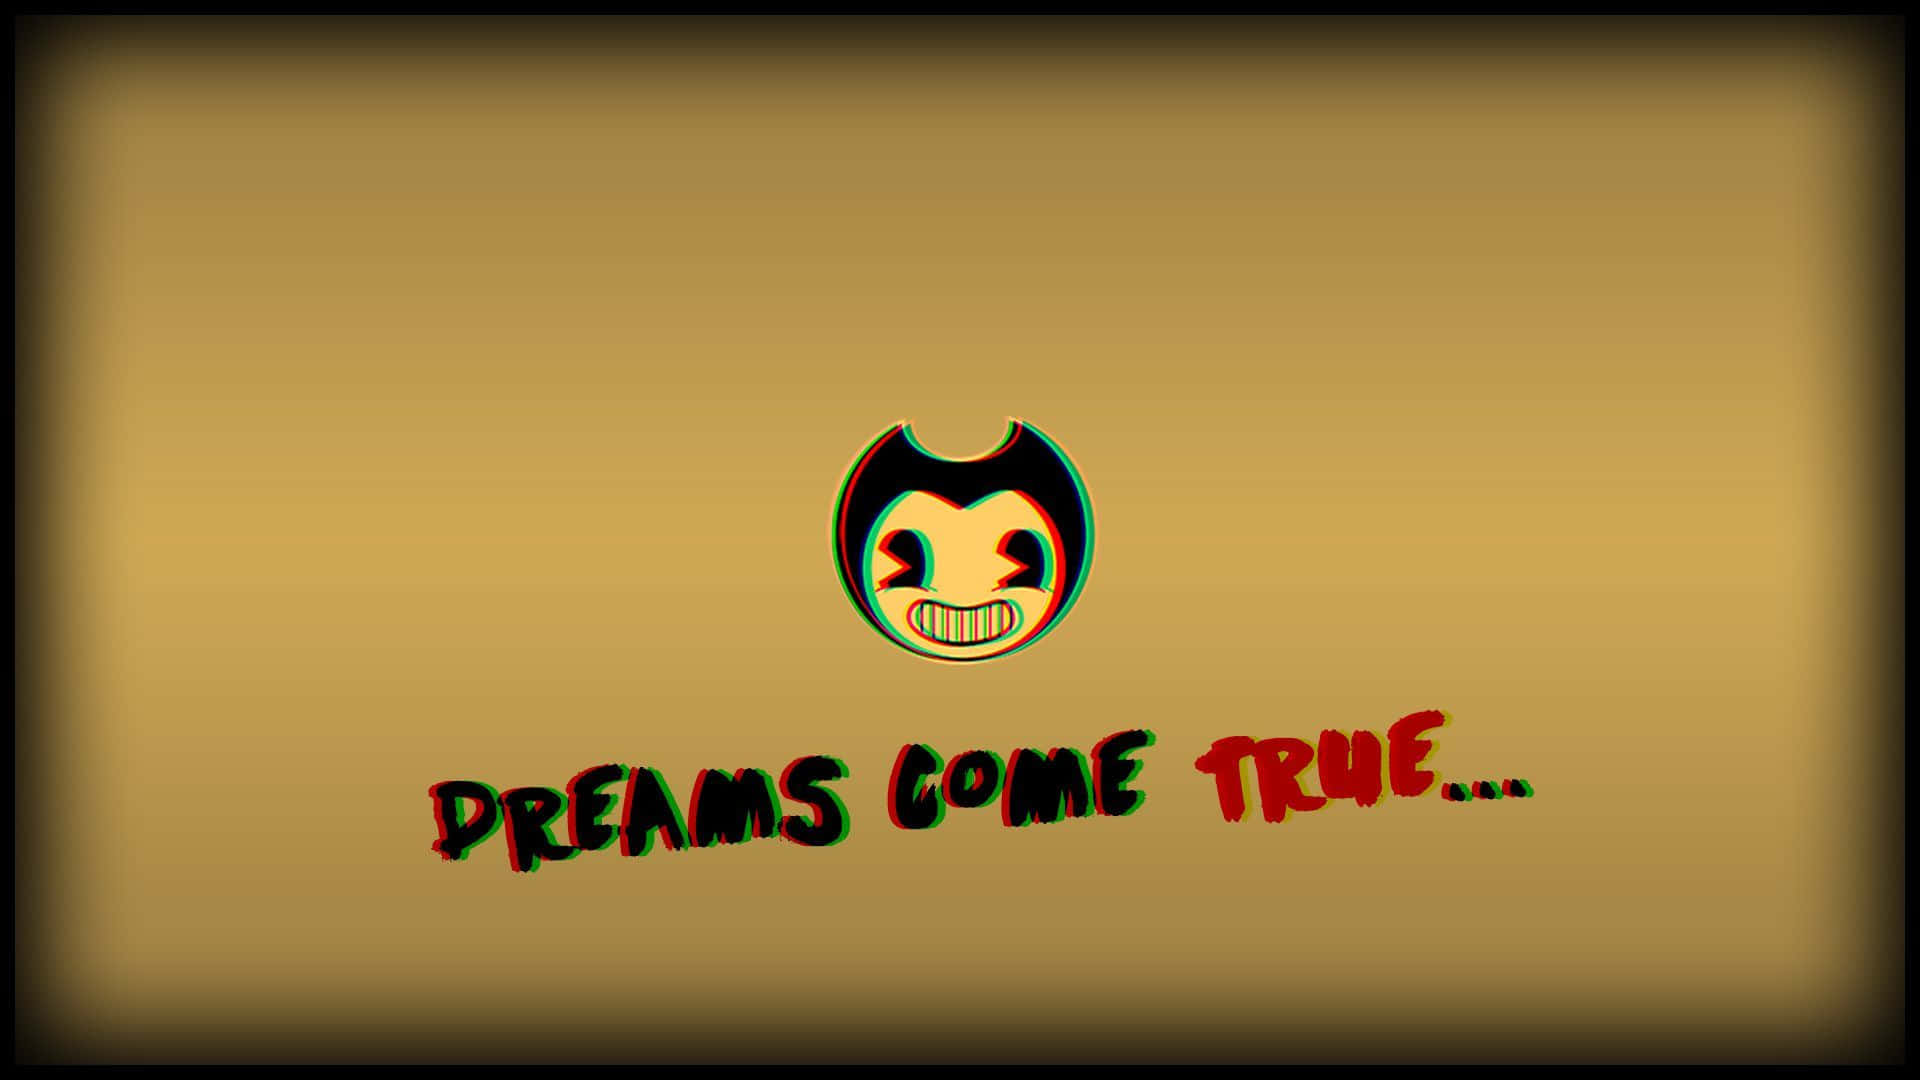 A Cartoon Image Of A Cartoon Character With The Words Dreams Come True